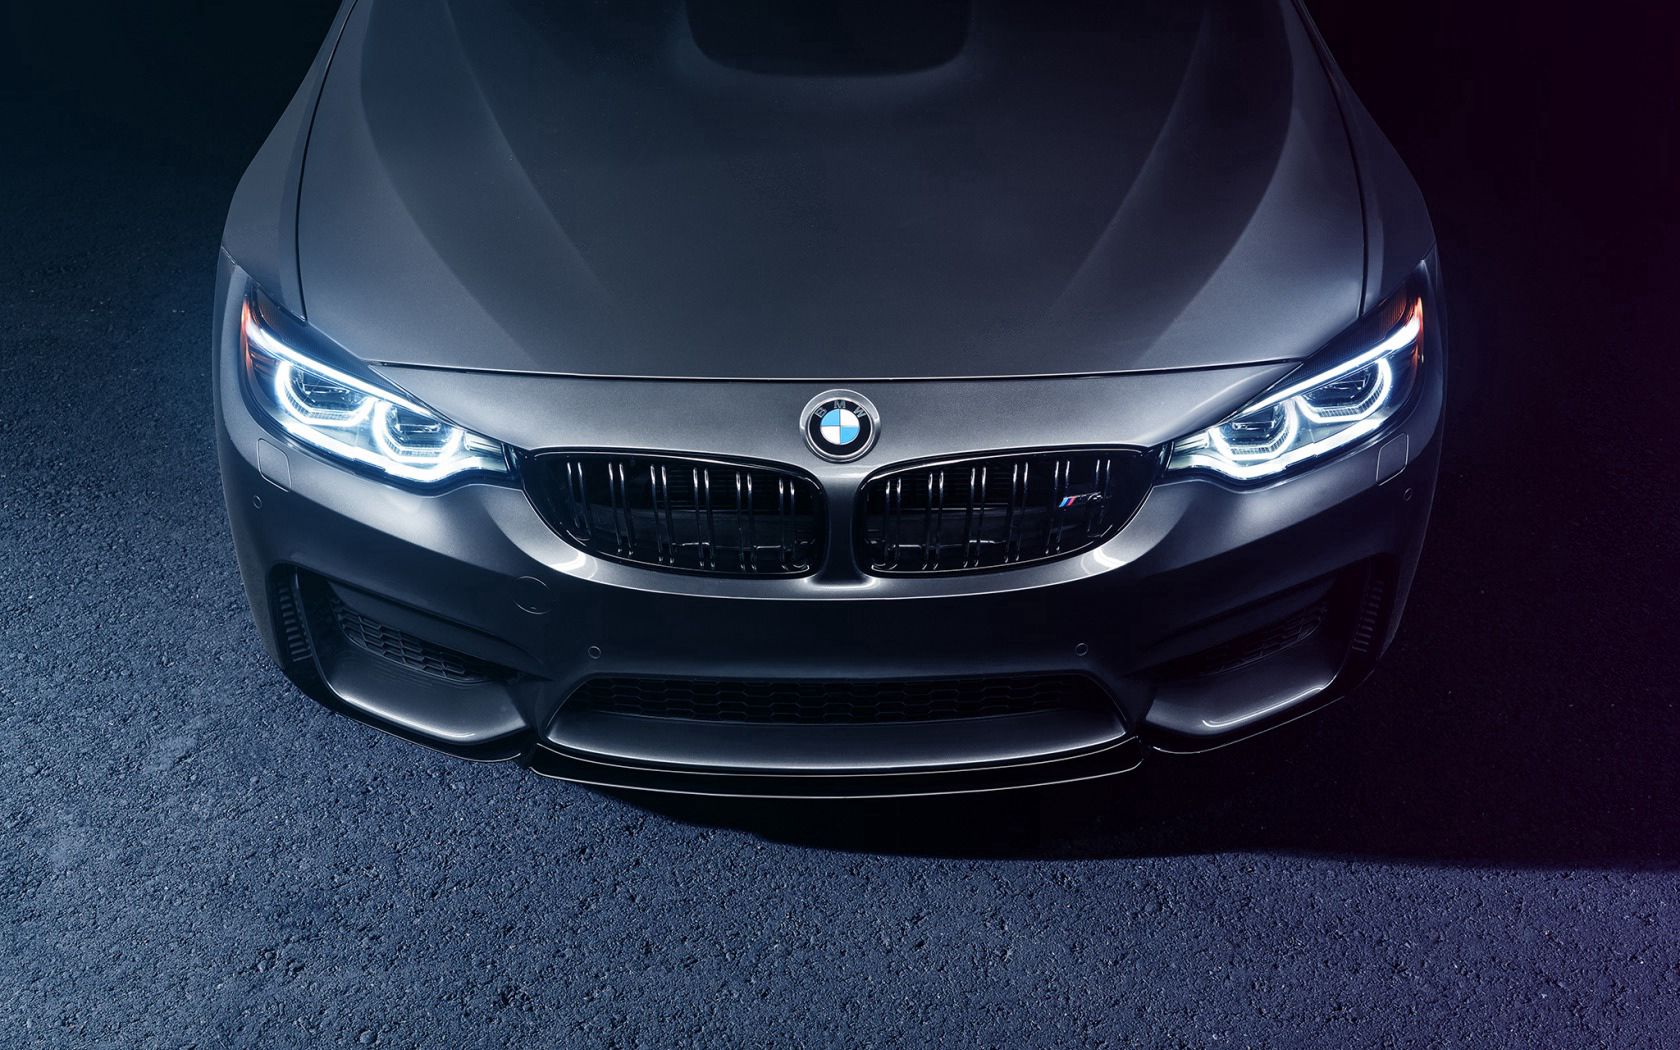 bmw, cars, front view, hood, m4 5K